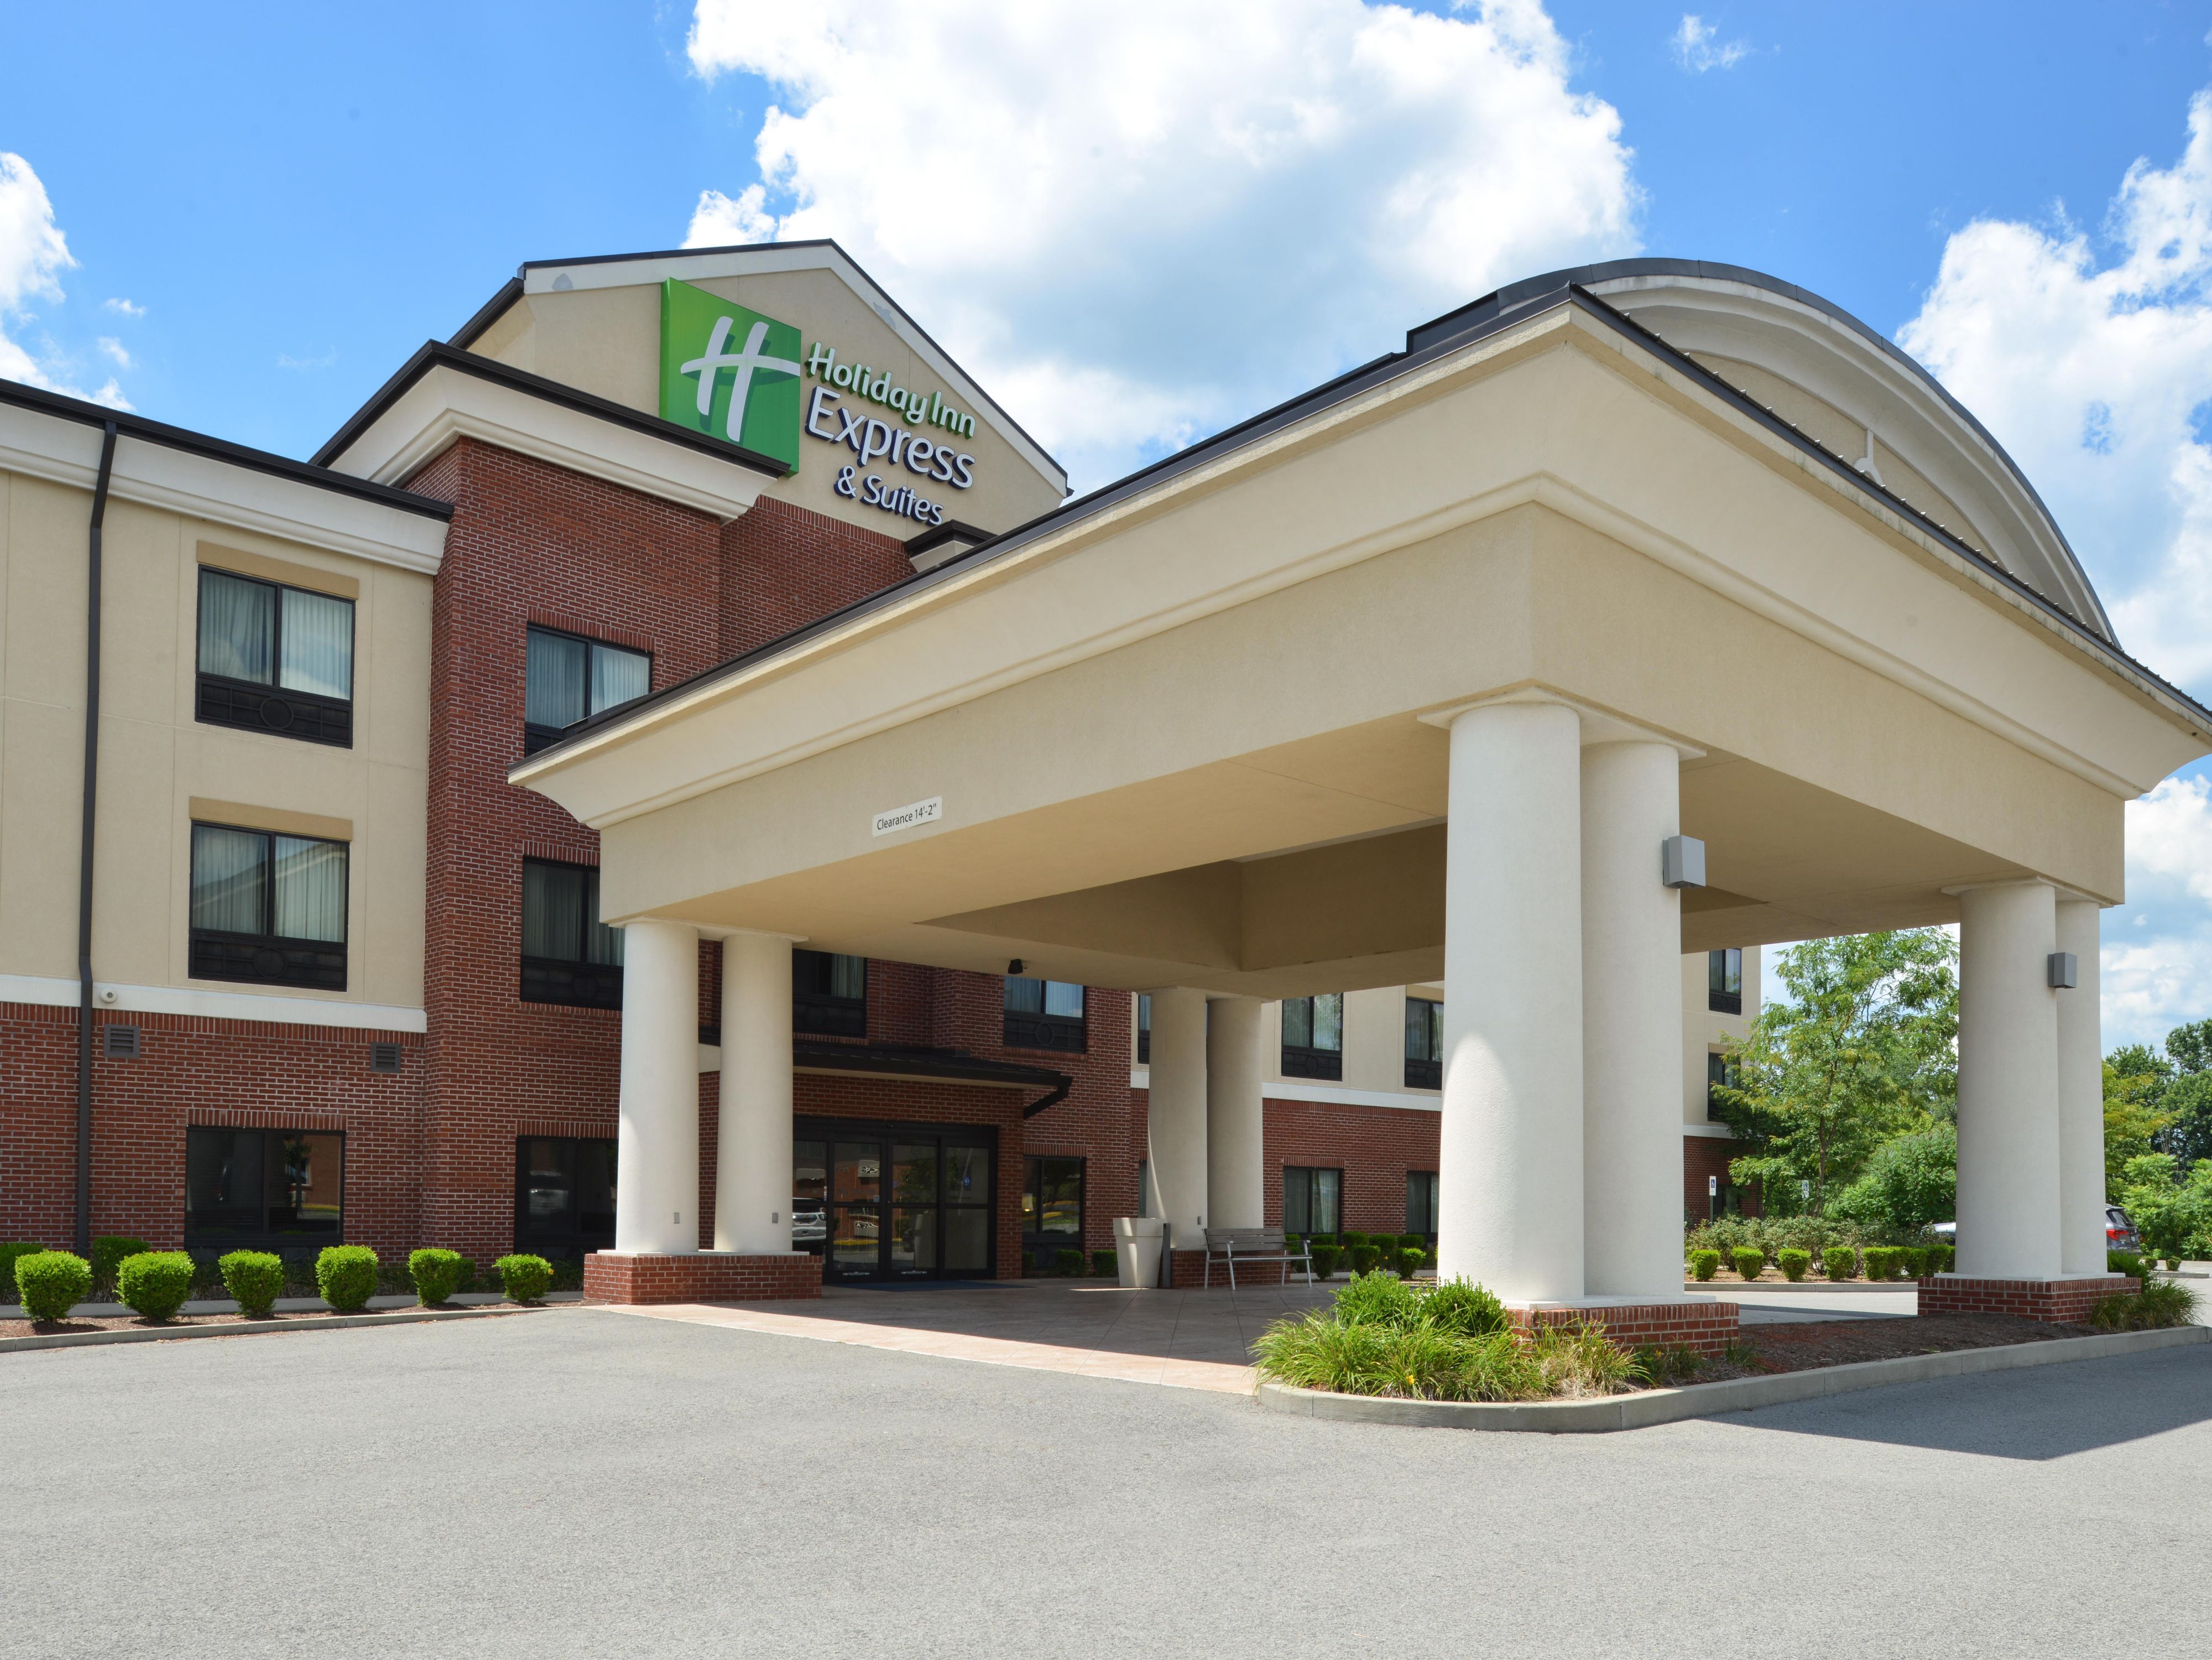 https://digital.ihg.com/is/image/ihg/holiday-inn-express-and-suites-fairmont-4661092372-4x3